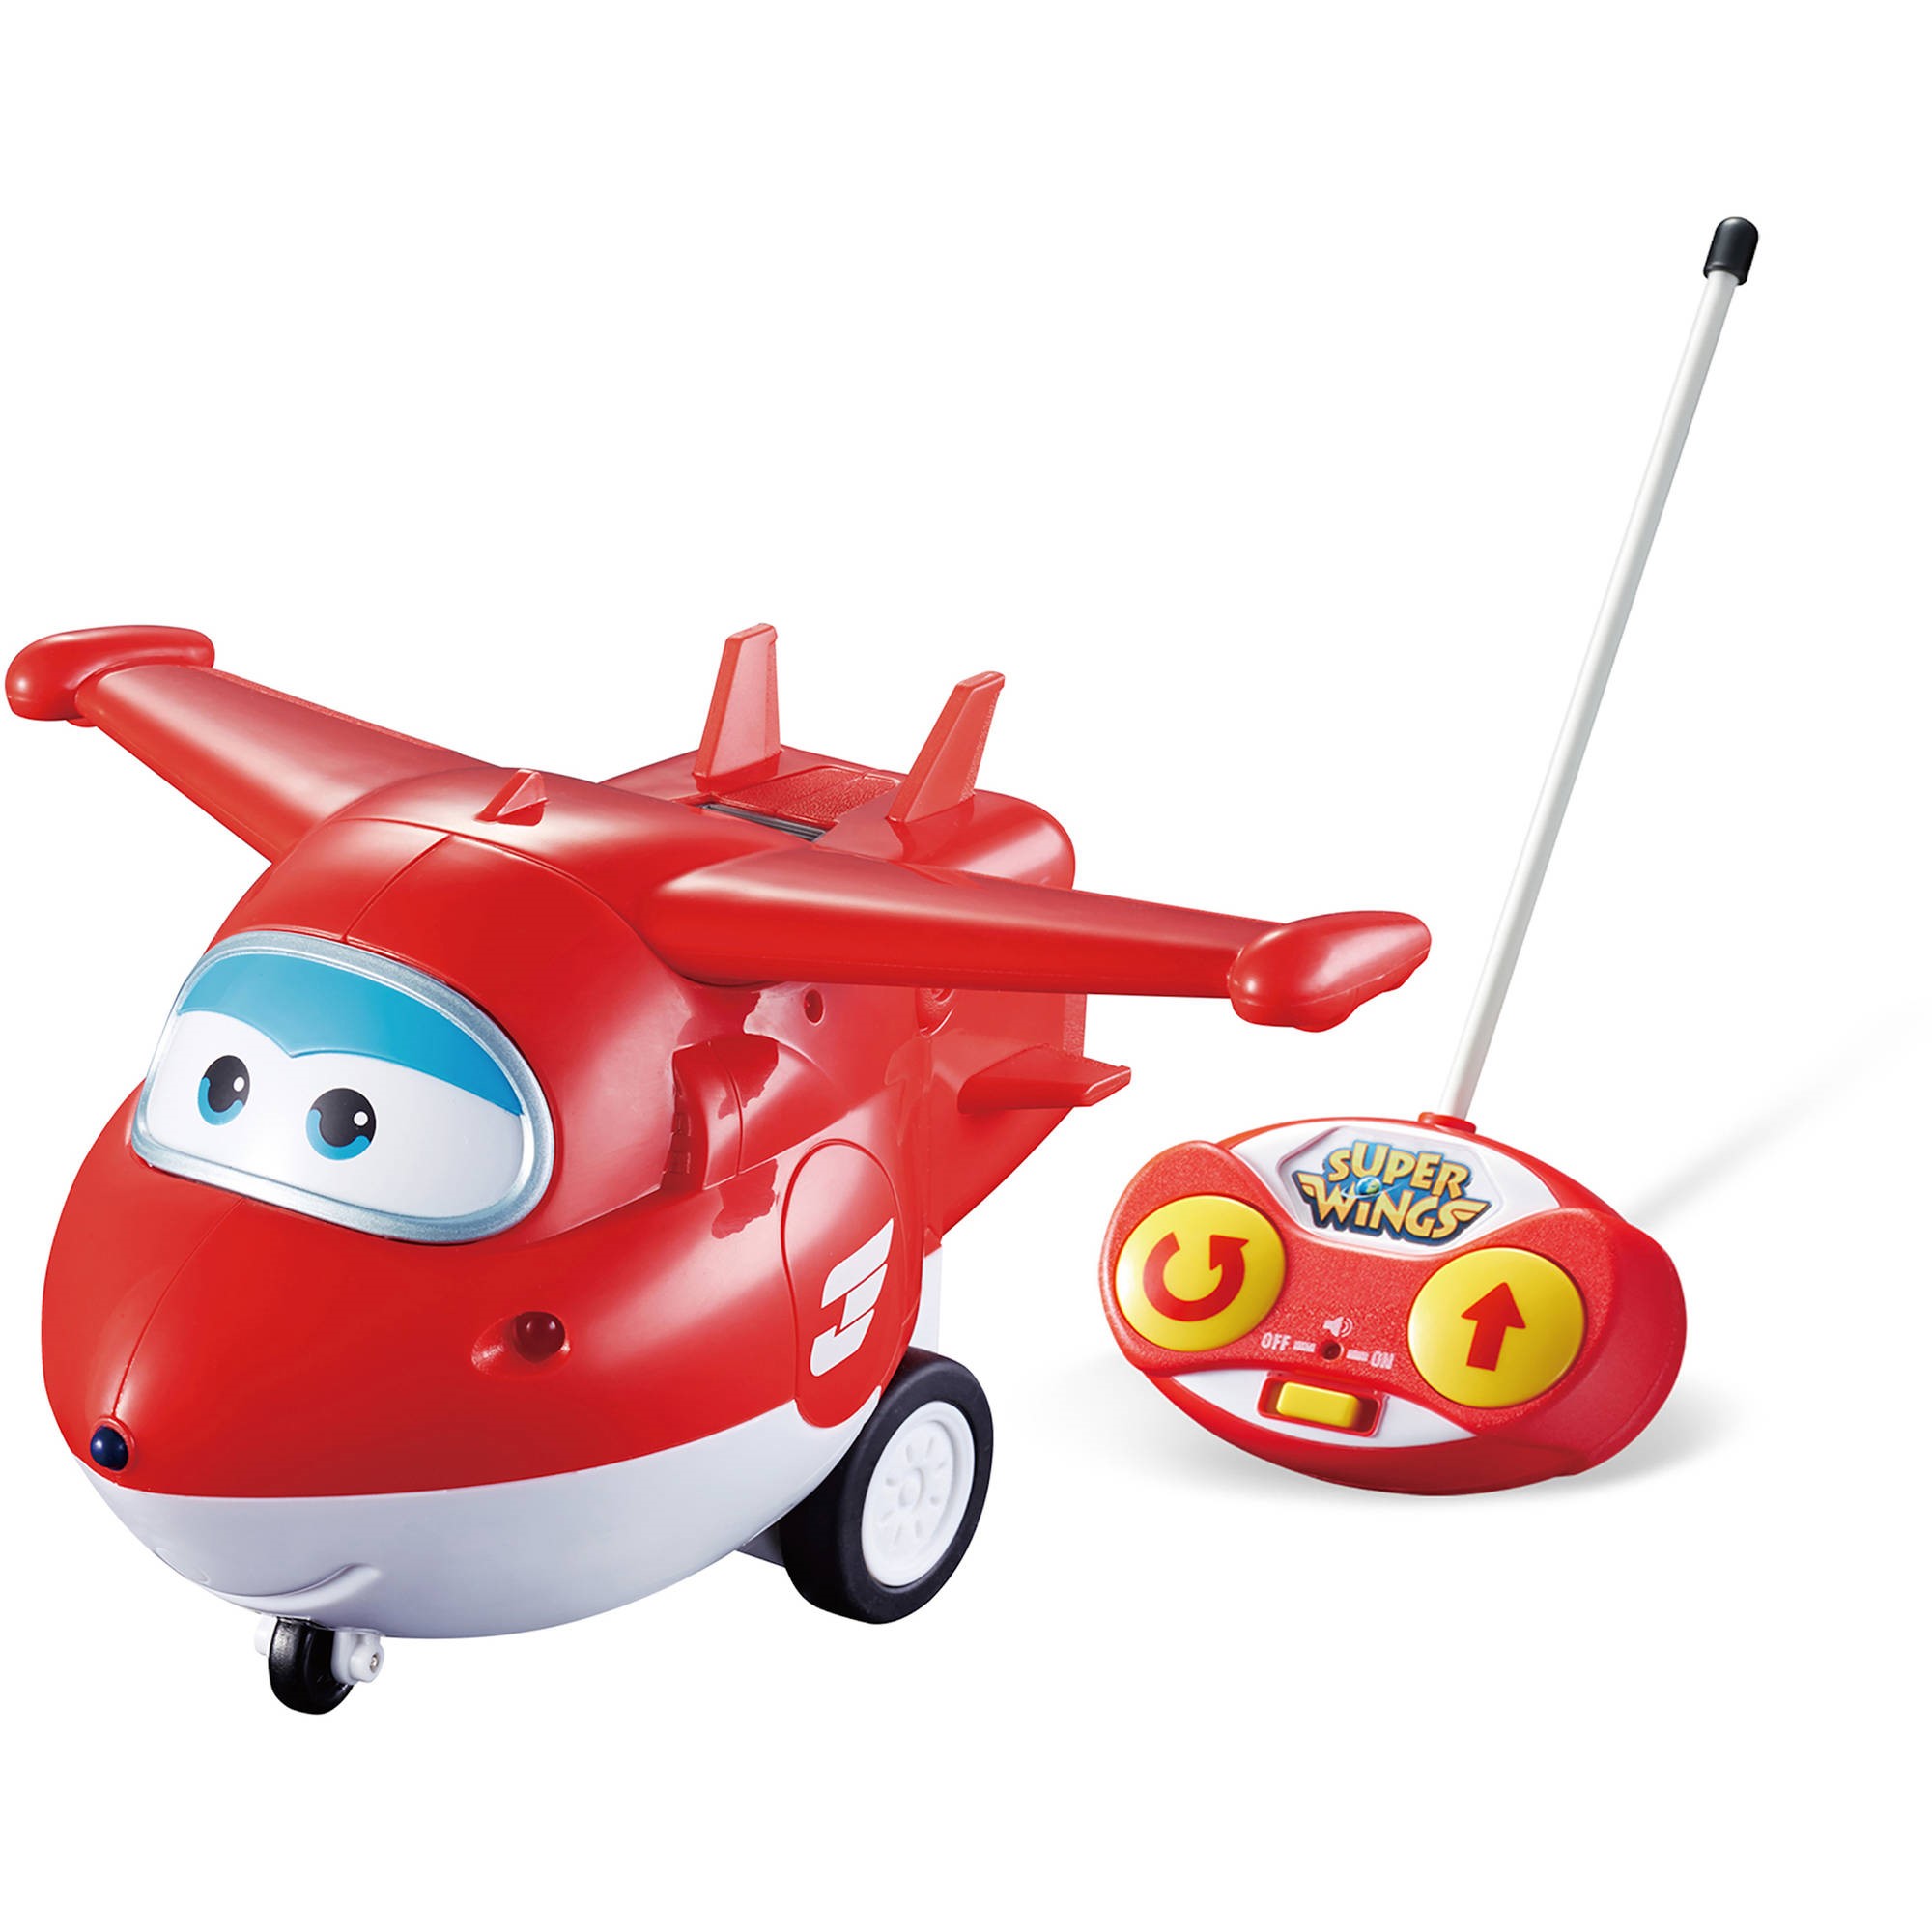 Super Wings Remote Control Jett - image 1 of 6